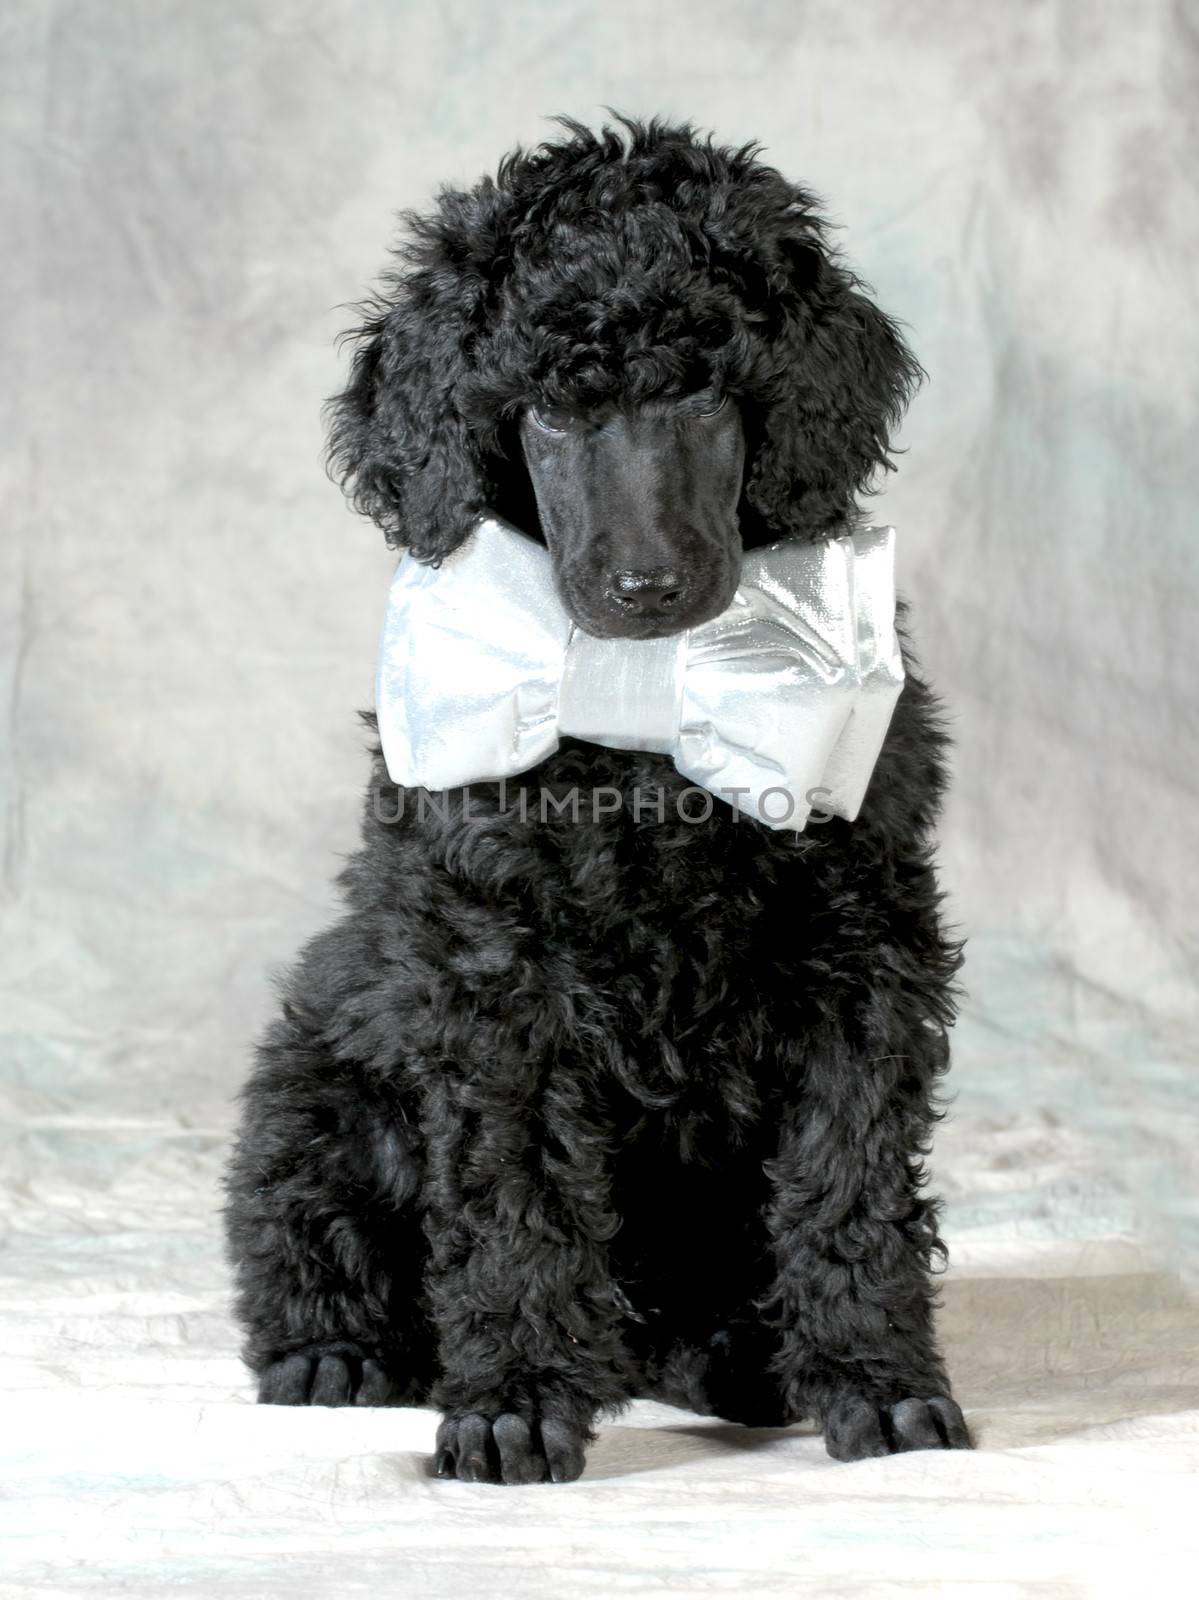 handsome puppy - standard poodle puppy wearing a bowtie sitting on grey background - 8 weeks old